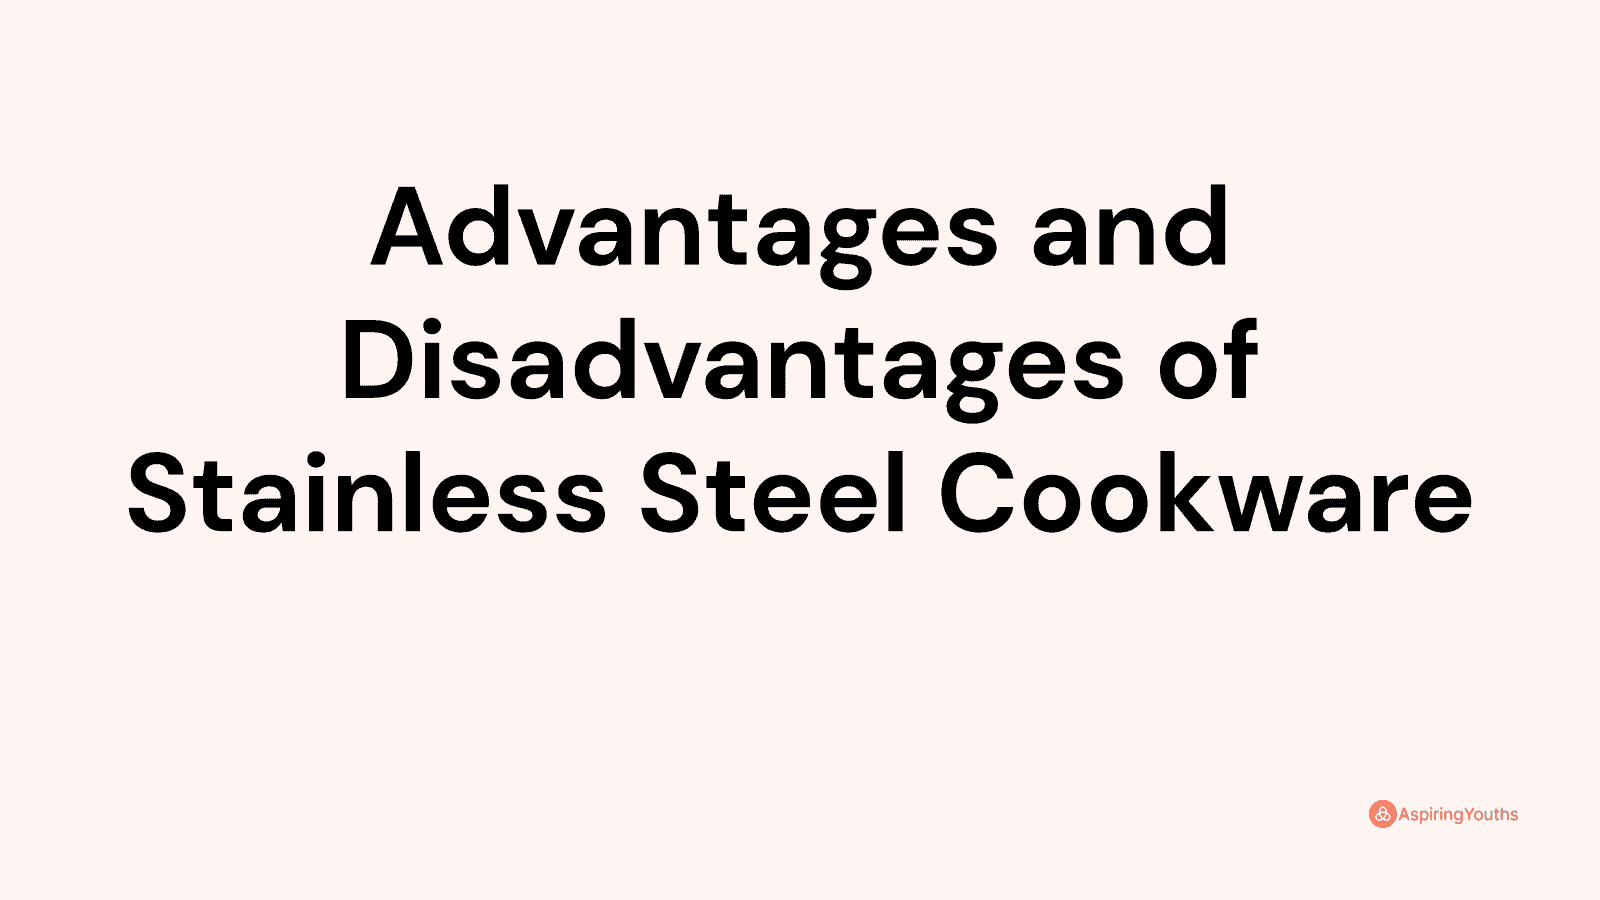 Advantages and disadvantages of Stainless Steel Cookware